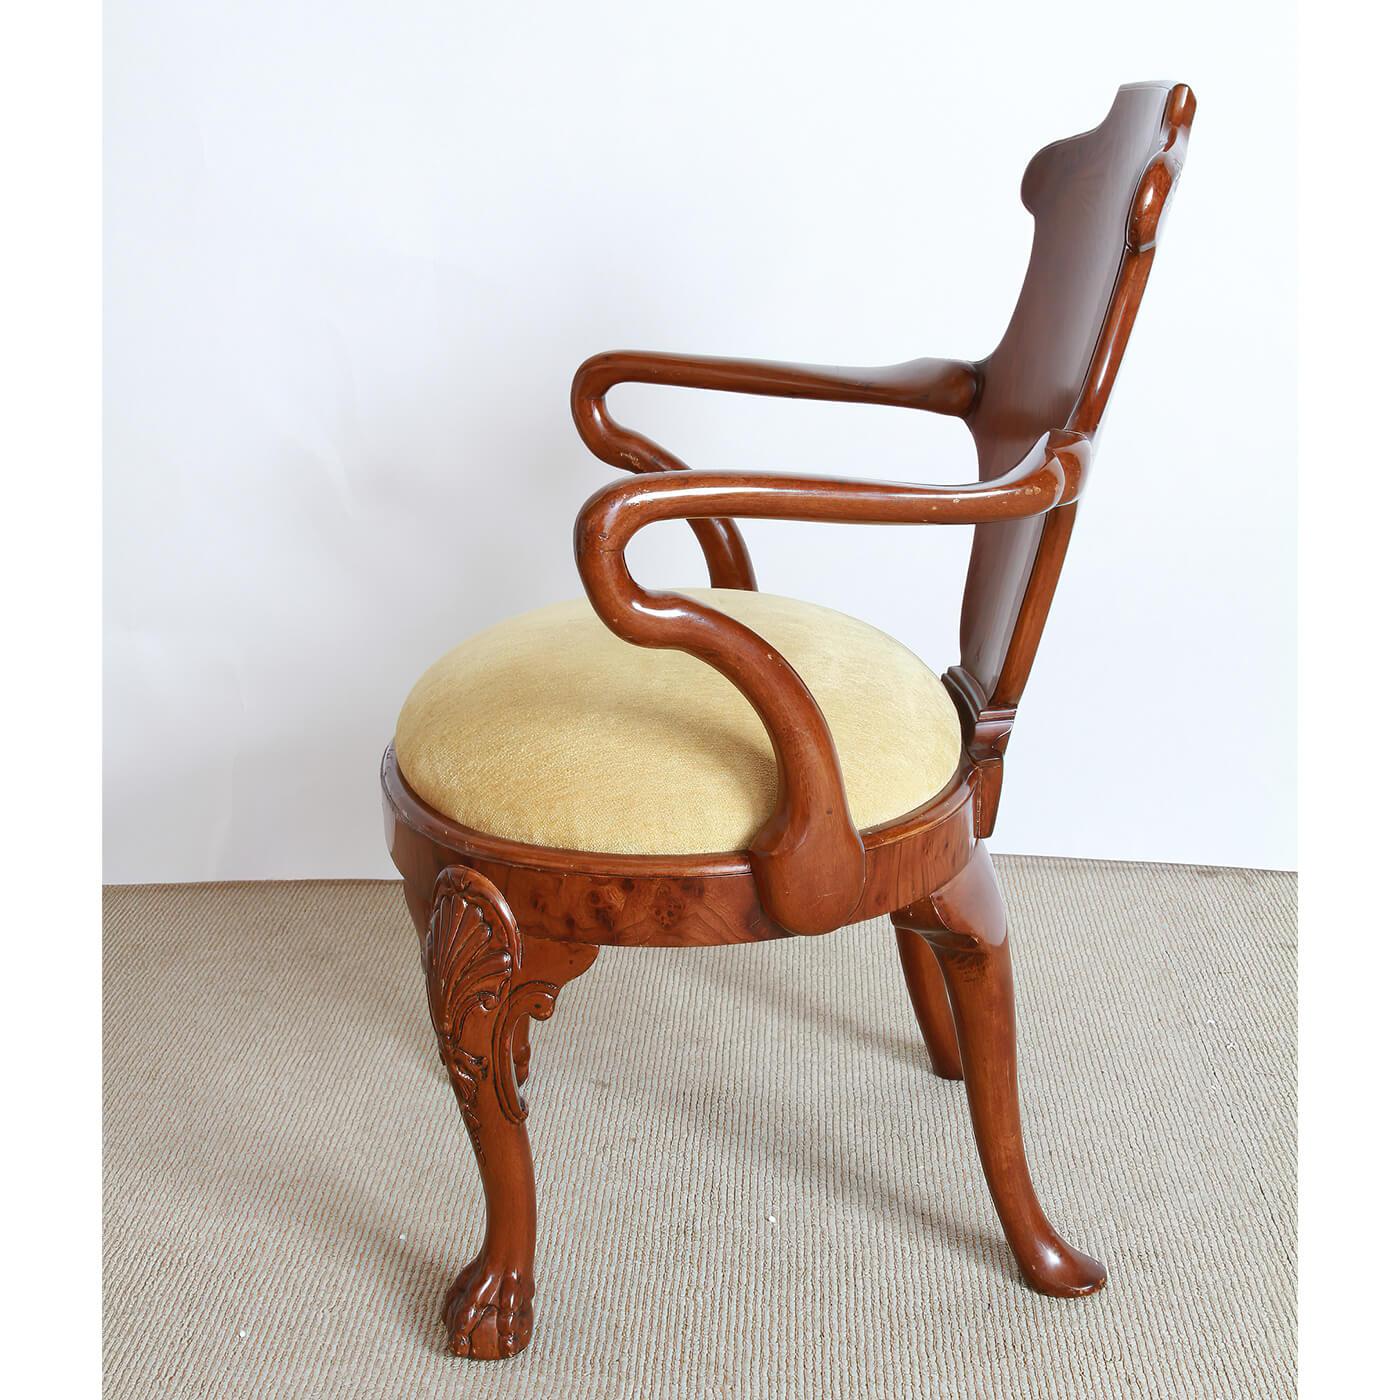 An unusual English George I style armchair with a curved splat and Shepard's crook arms, an oval inset upholstered seat with shell carved knees and bold ball and claw feet. ca 1940's.

Dimensions: 24.5